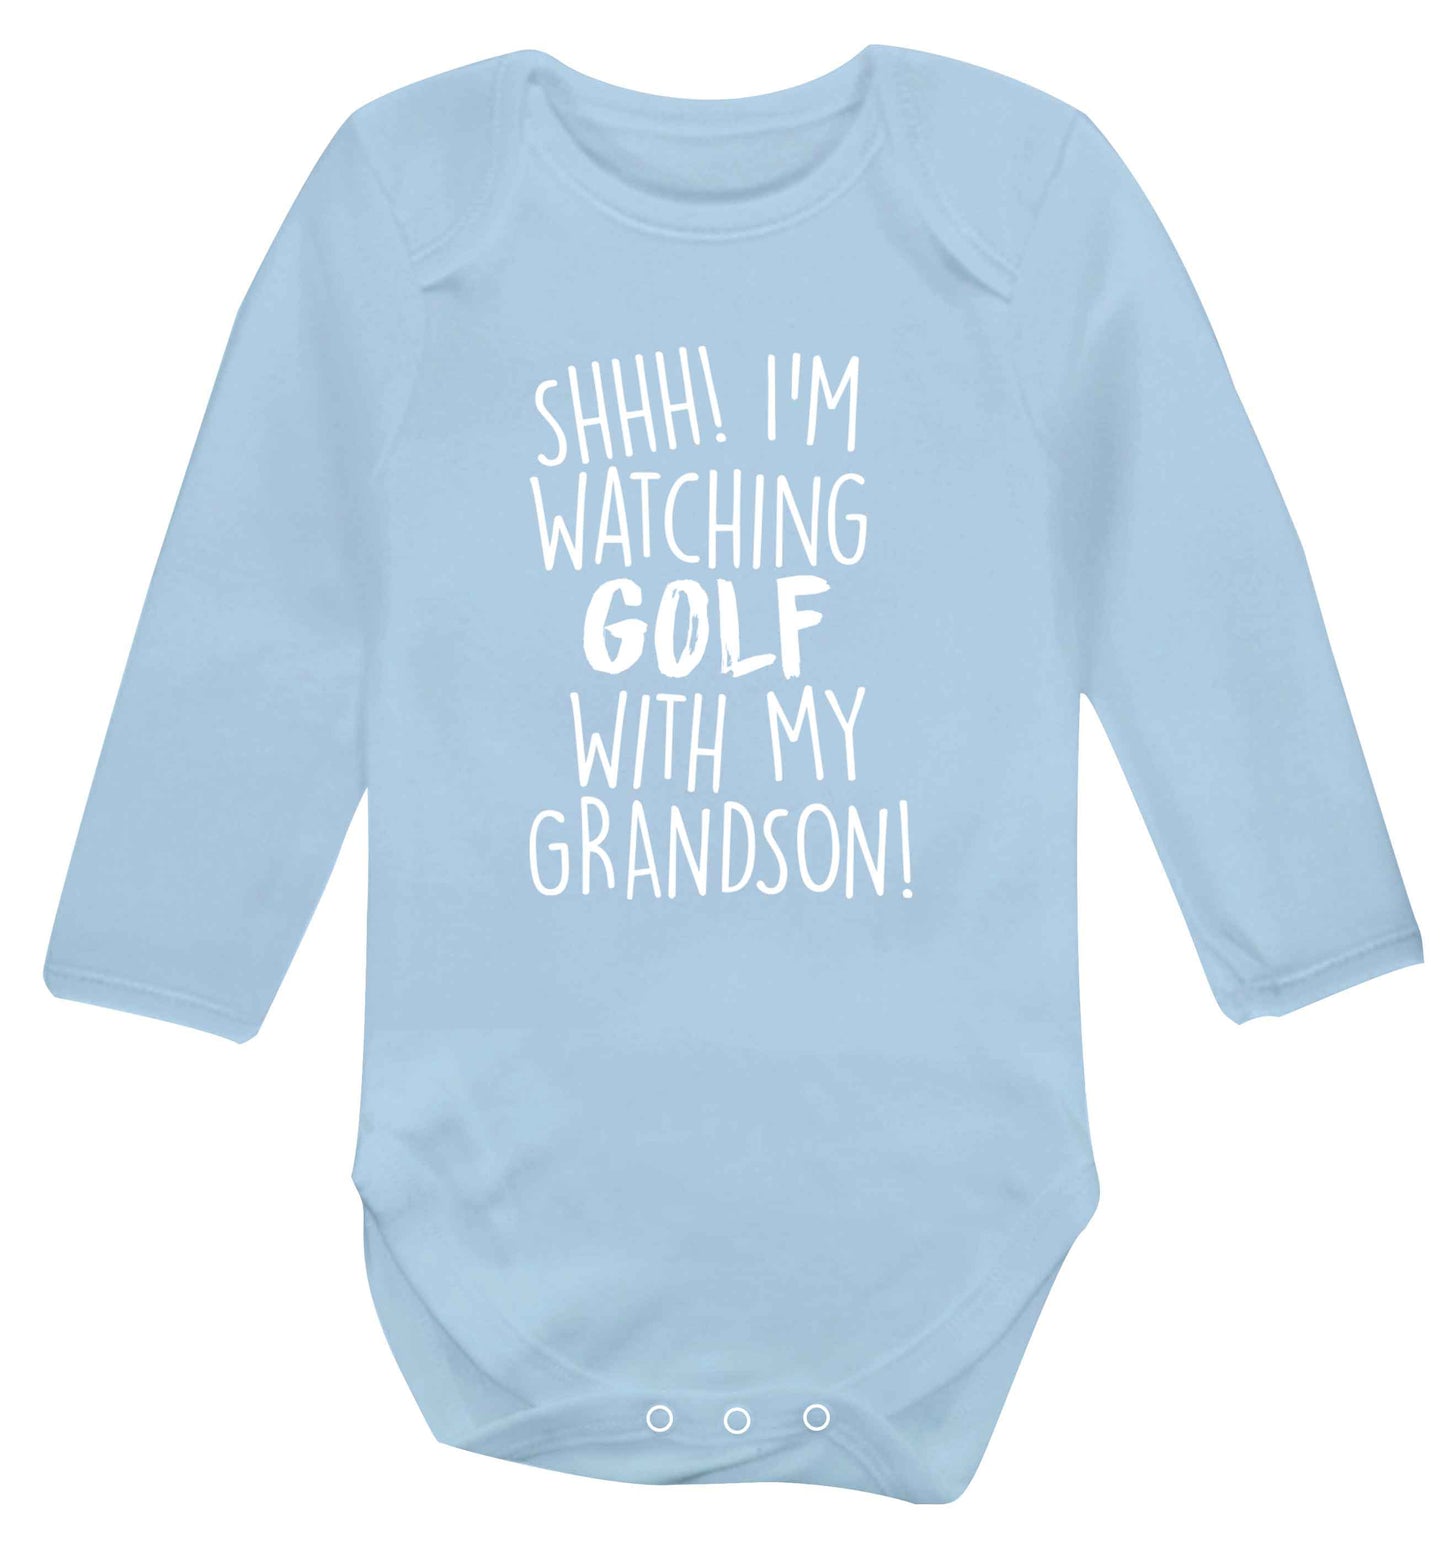 Shh I'm watching golf with my grandsonBaby Vest long sleeved pale blue 6-12 months